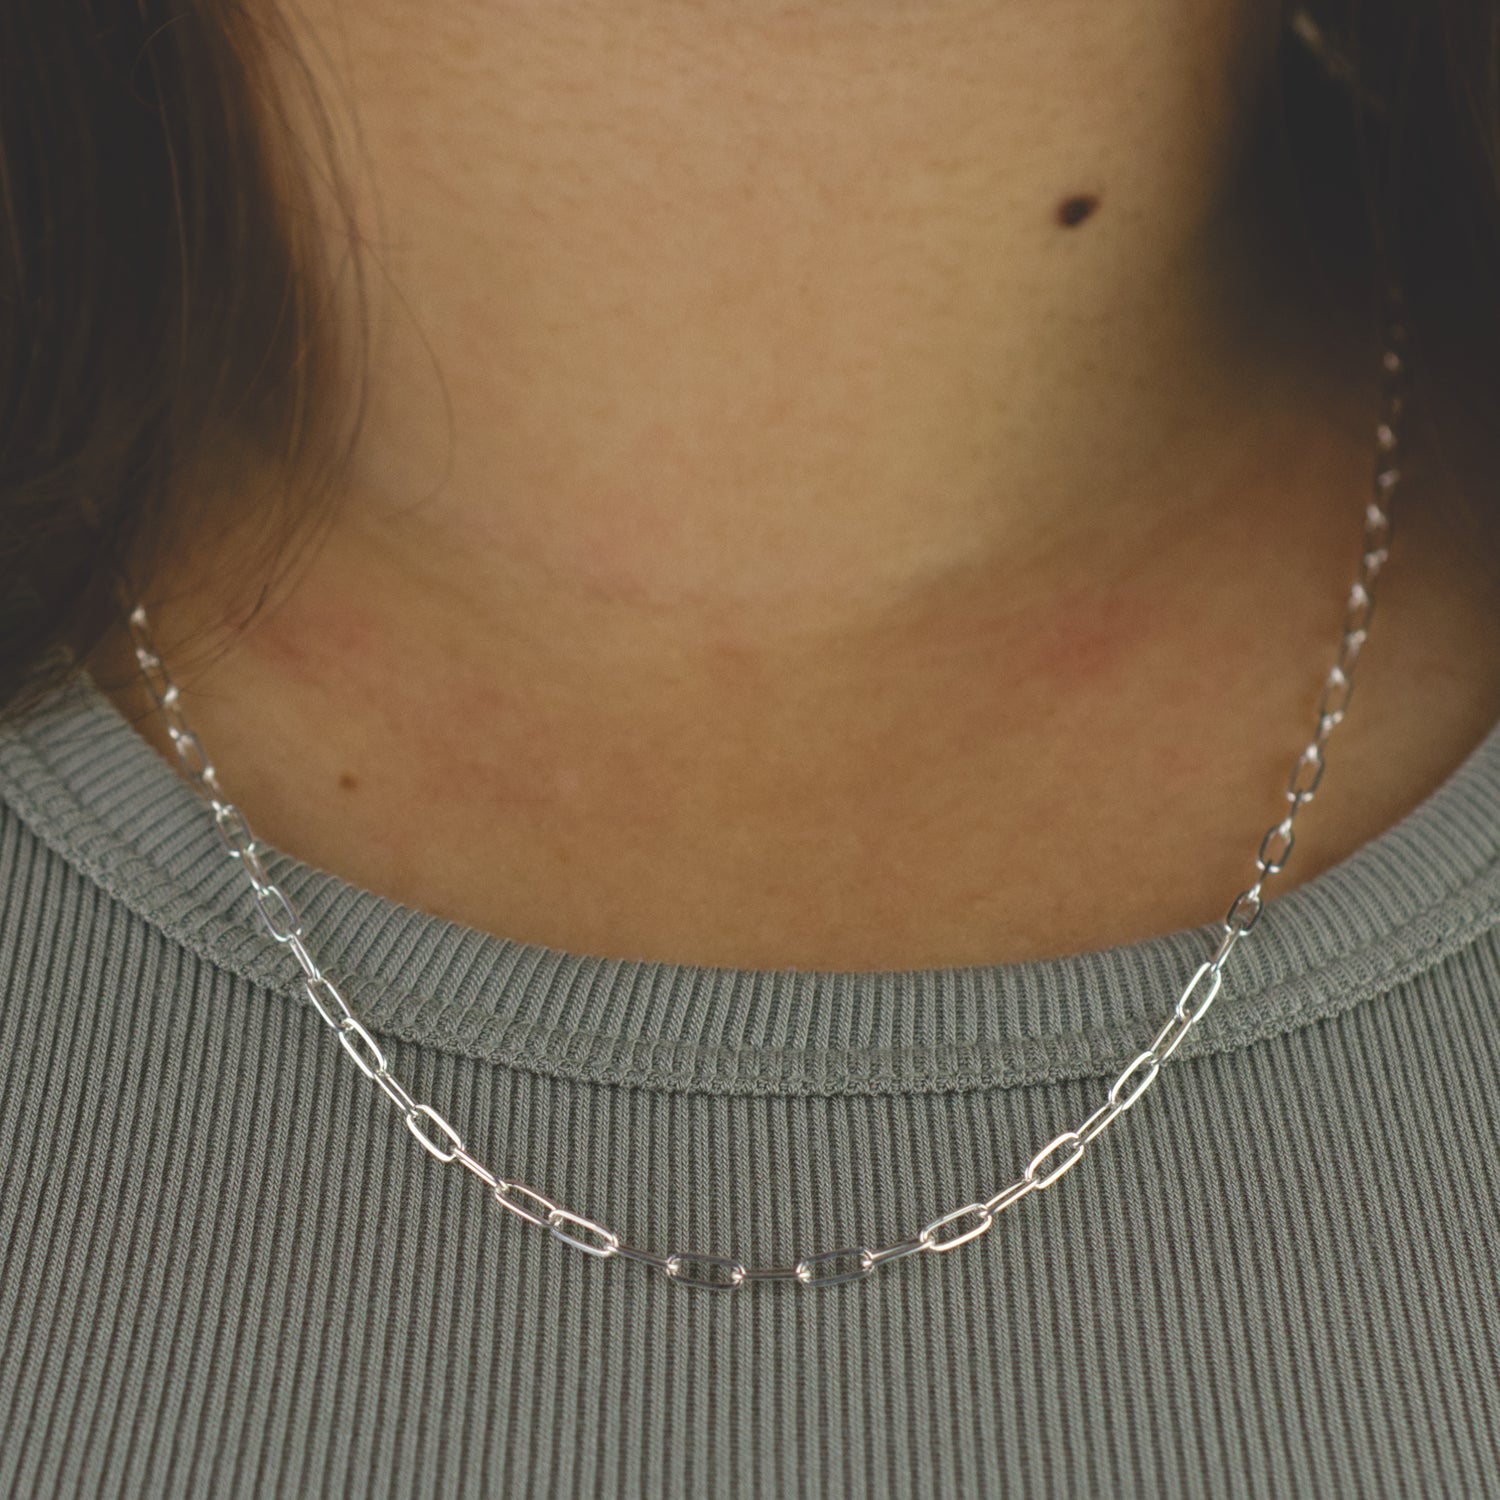 Woman wearing a 925 Sterling Silver paperclip chain necklace with dainty style (medium) link size